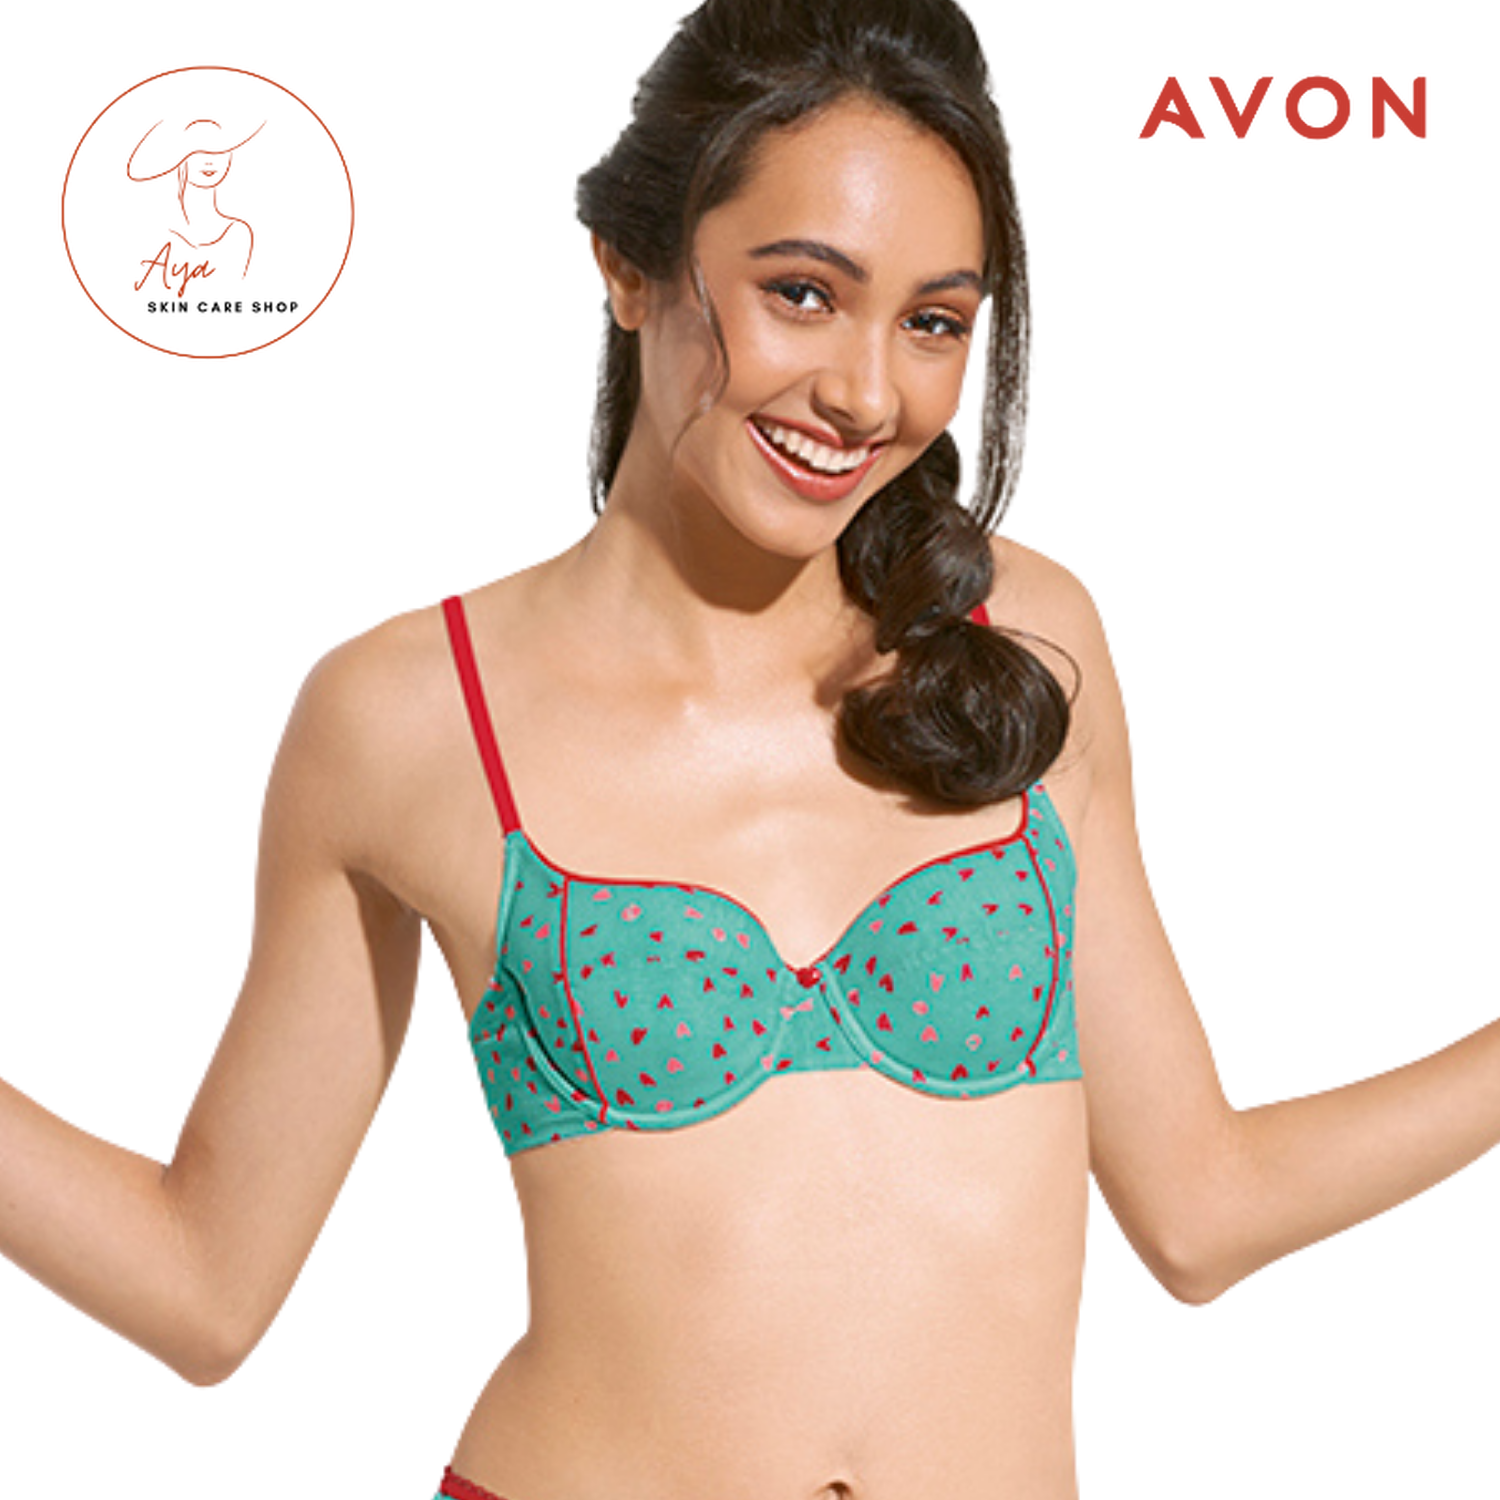 Avon Missy Teens Bra for Teens, Nonwire and Underiwre Missy Teen's Bra -  Aya Skin Care Shop